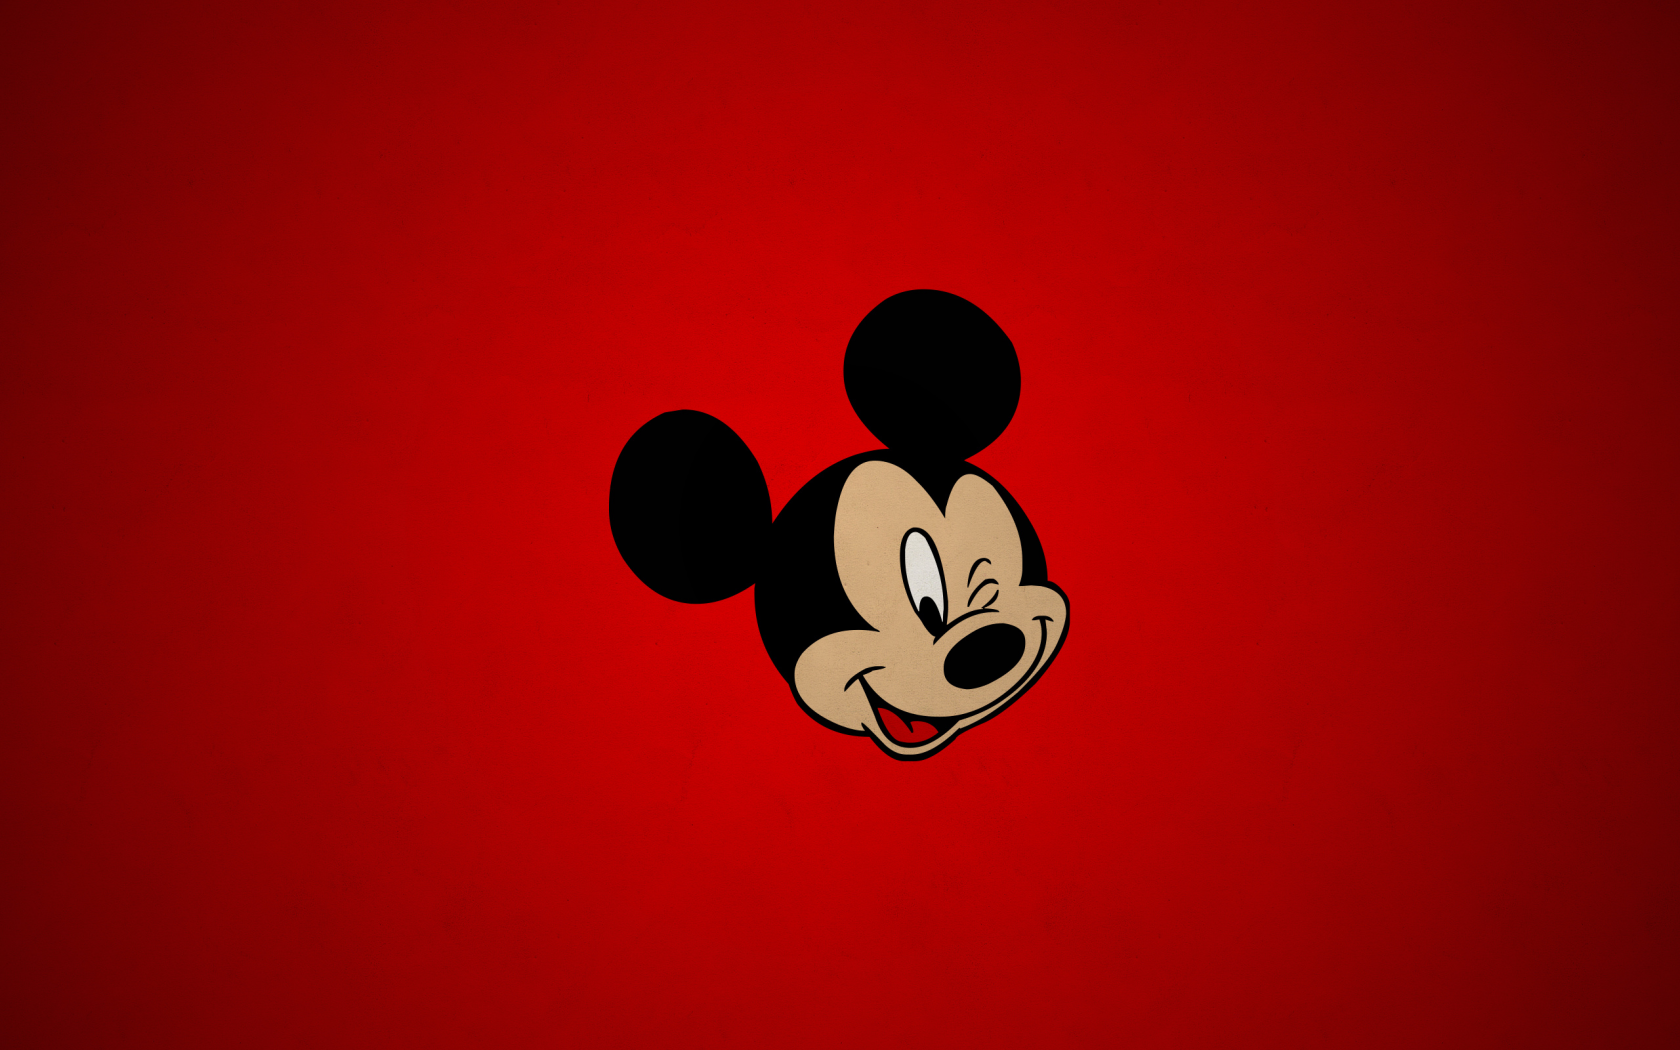 paper, mouse, mickey, disney, red, texture, simple, cartoon